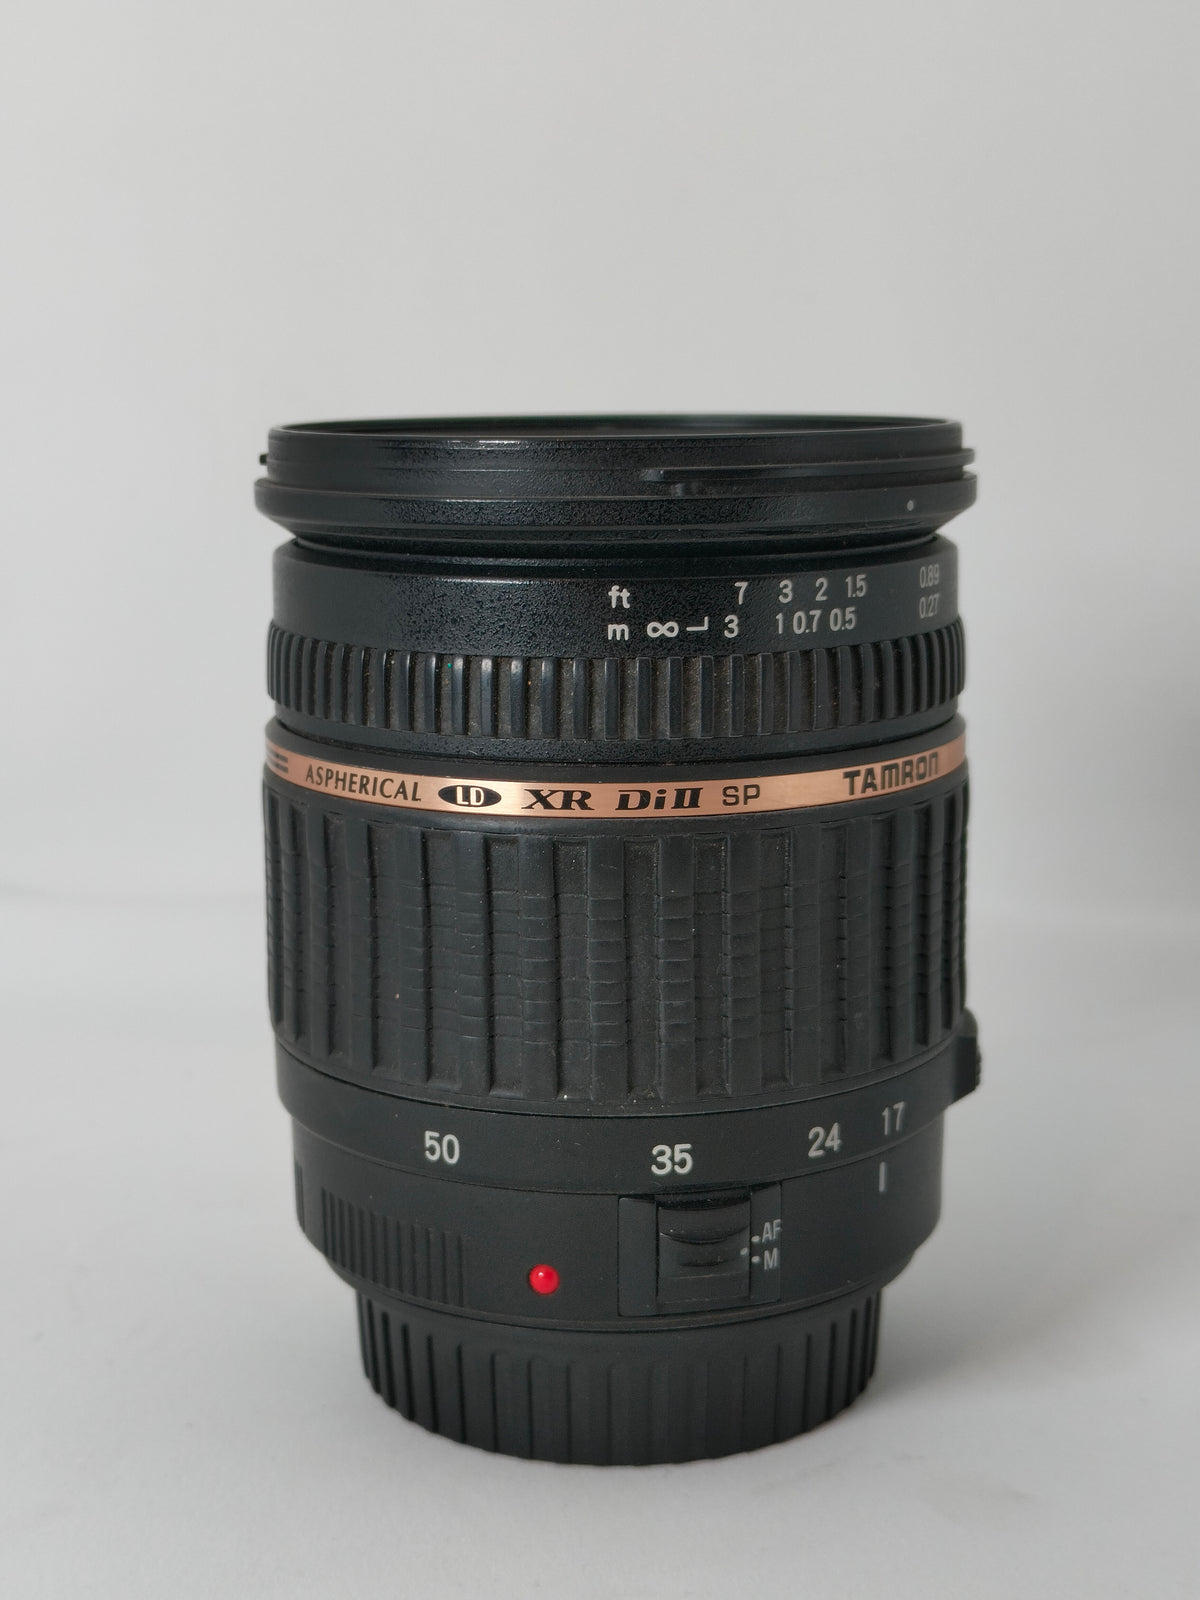 Tamron 17-50mm 2.8 canon used (273399)